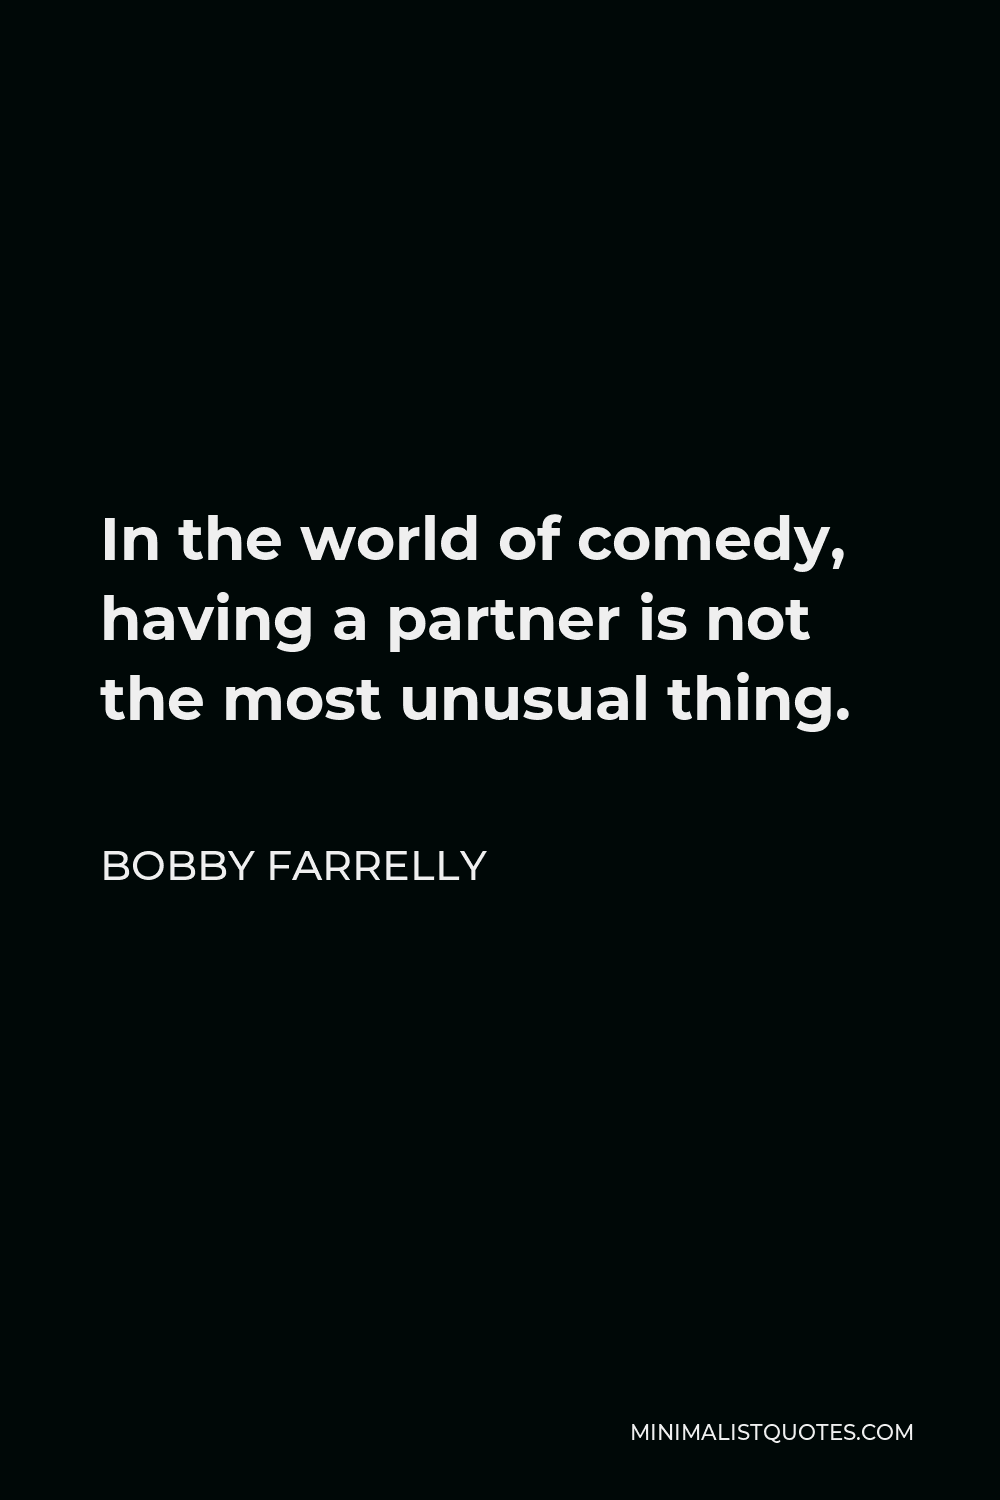 Bobby Farrelly Quote - In the world of comedy, having a partner is not the most unusual thing.